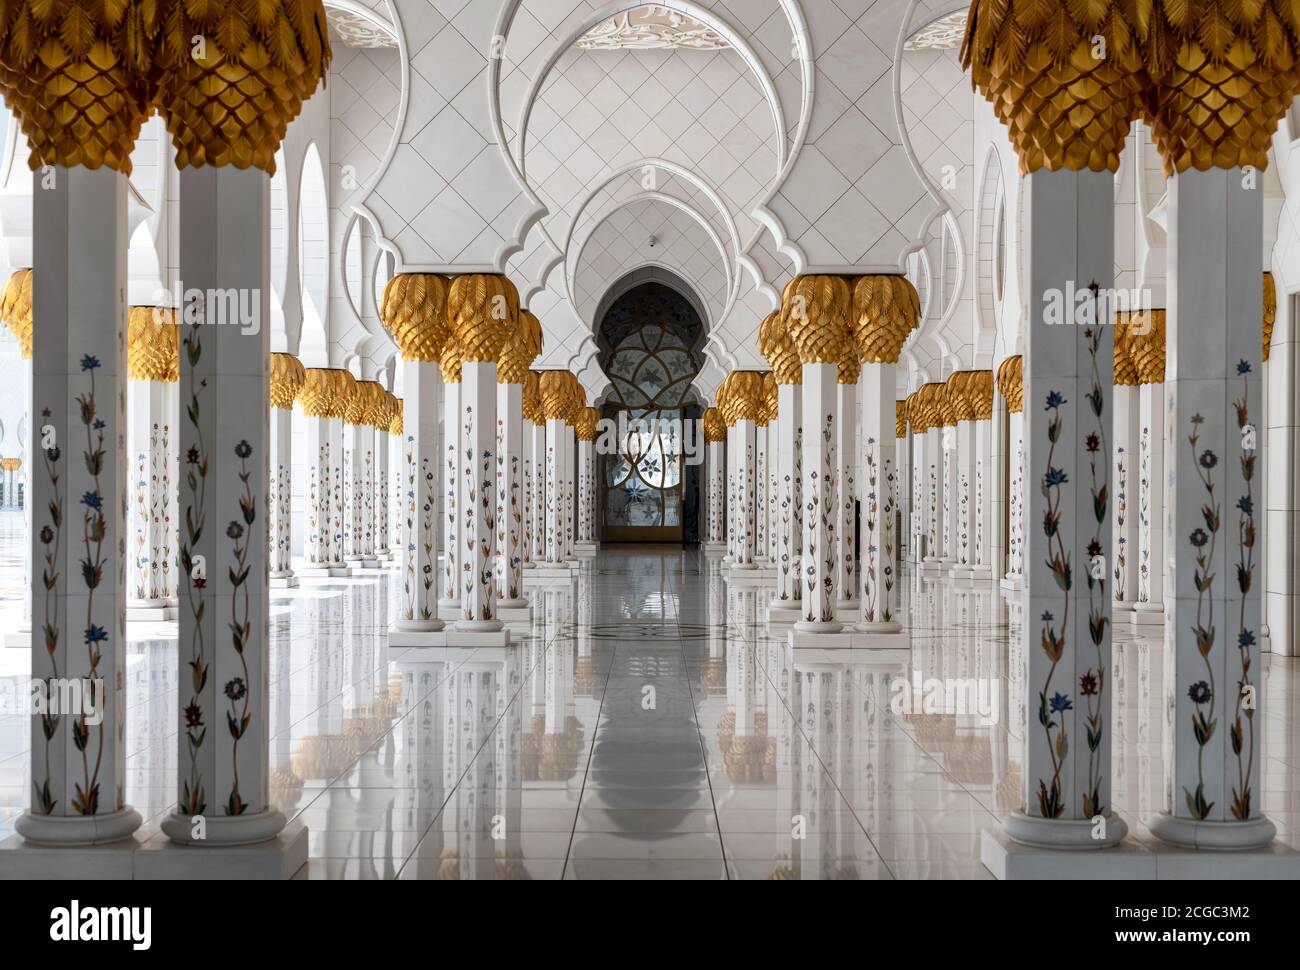 A day shot from inside the archway inside the  Sheikh Zayed Grand Mosque, Abu Dhabi. This includes its architectural features of marble columns with marble floral design and date palm capitals. Mosque completed 2007. Stock Photo